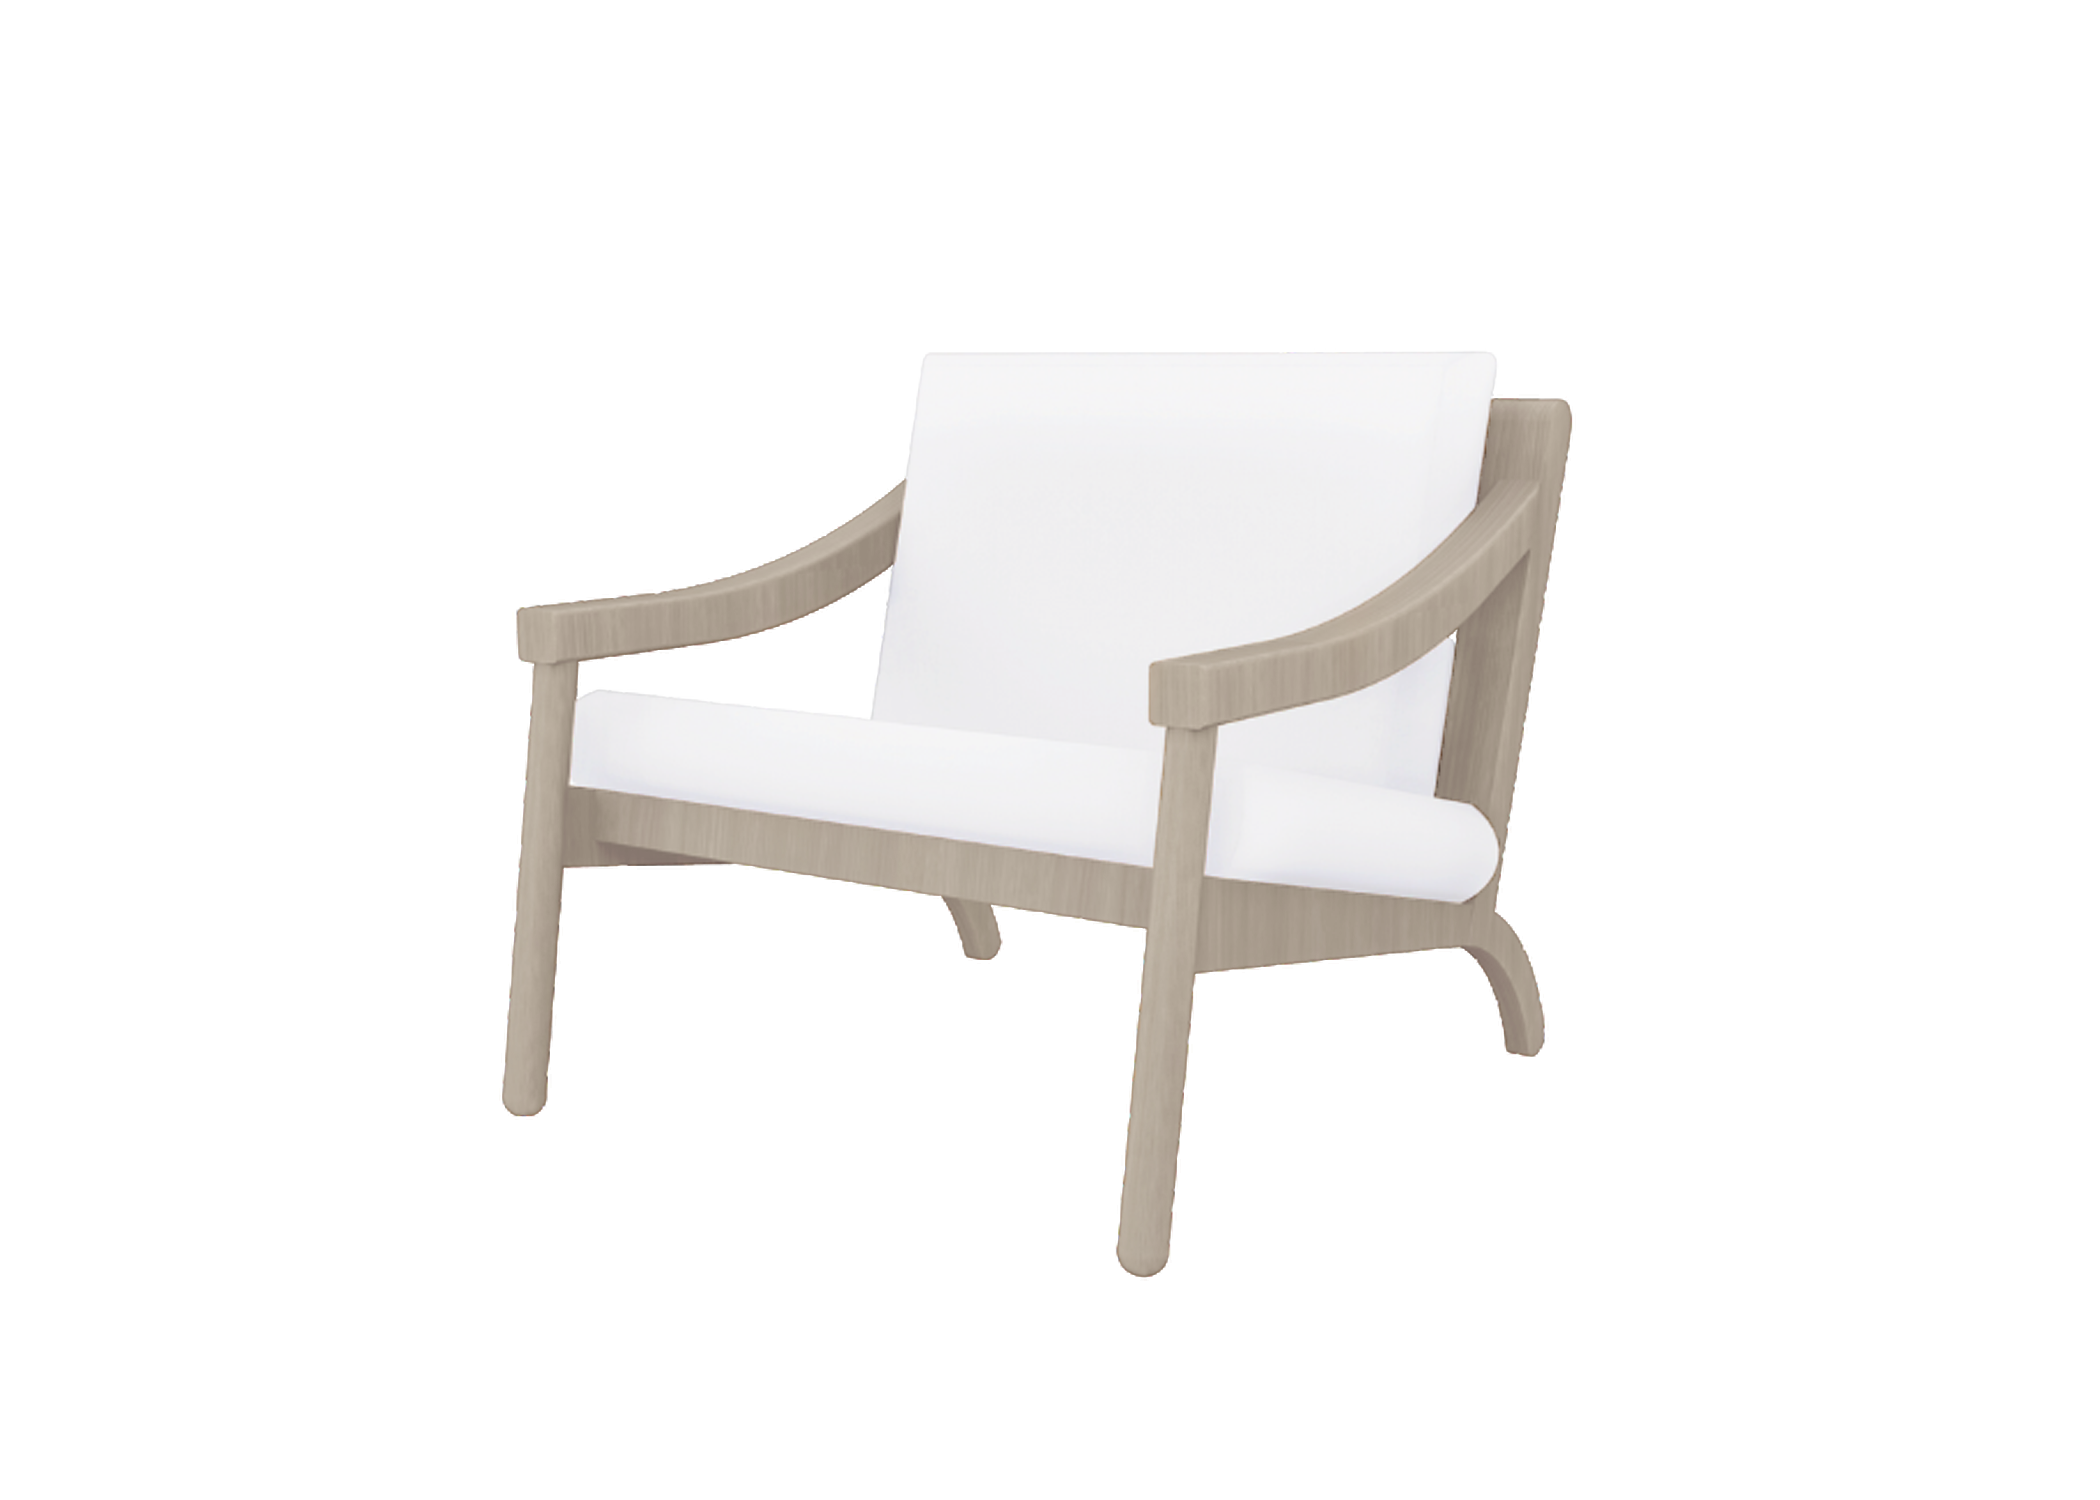 Grove Lounge Chair (Pre-order. Delivery in 3-4 weeks) - Lumi Candles PH